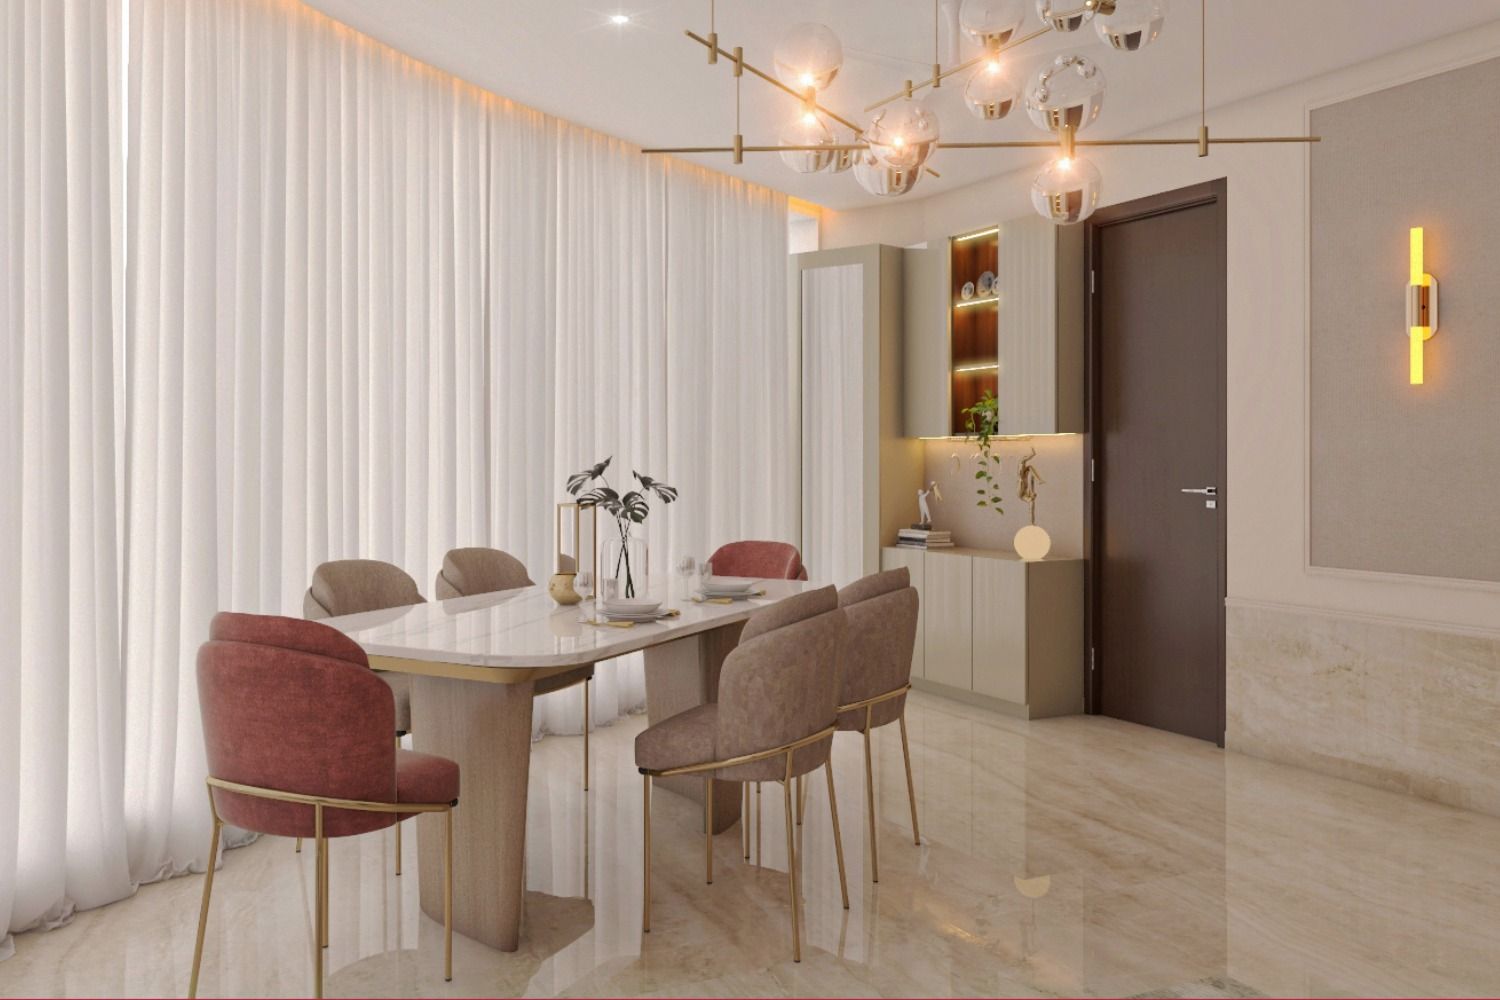 Contemporary Dining Room Design With Red And Beige Upholstered Chairs